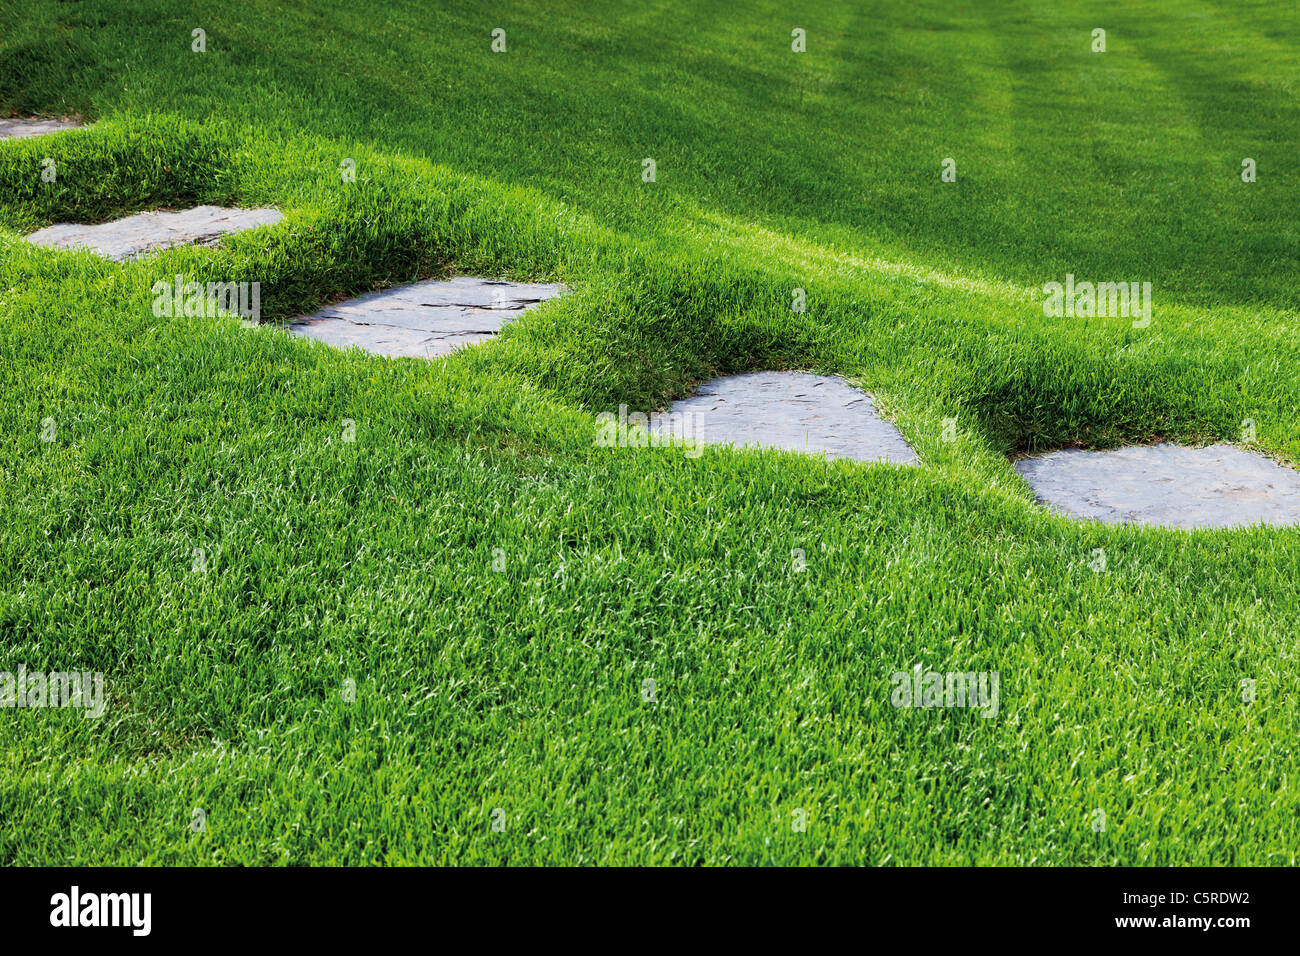 Germany, View of neatly manicured lawn with stepping stones Stock Photo